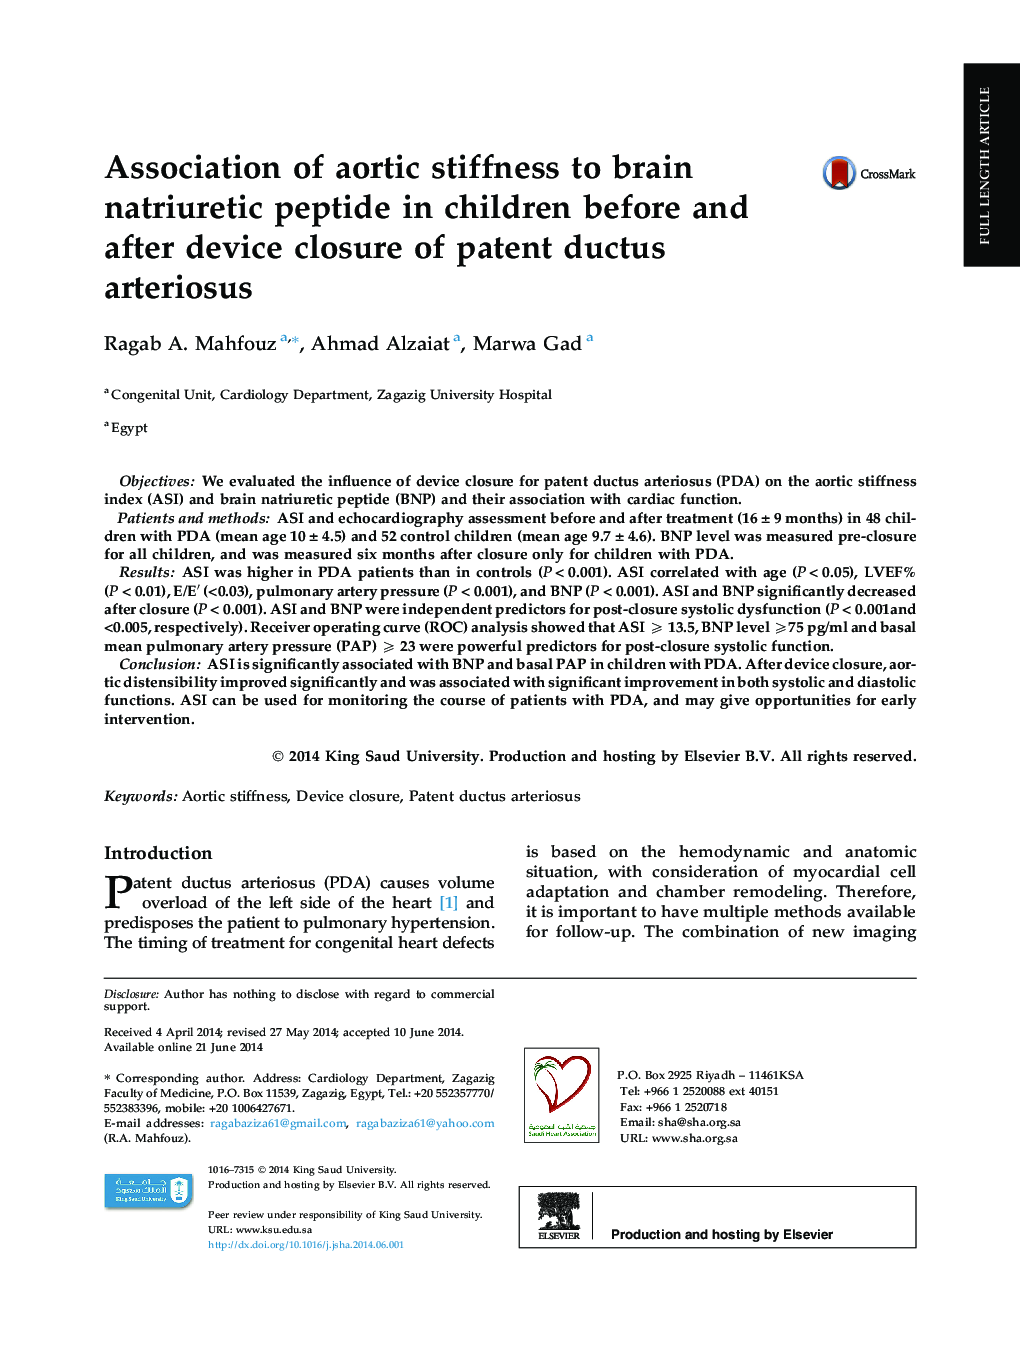 Association of aortic stiffness to brain natriuretic peptide in children before and after device closure of patent ductus arteriosus 